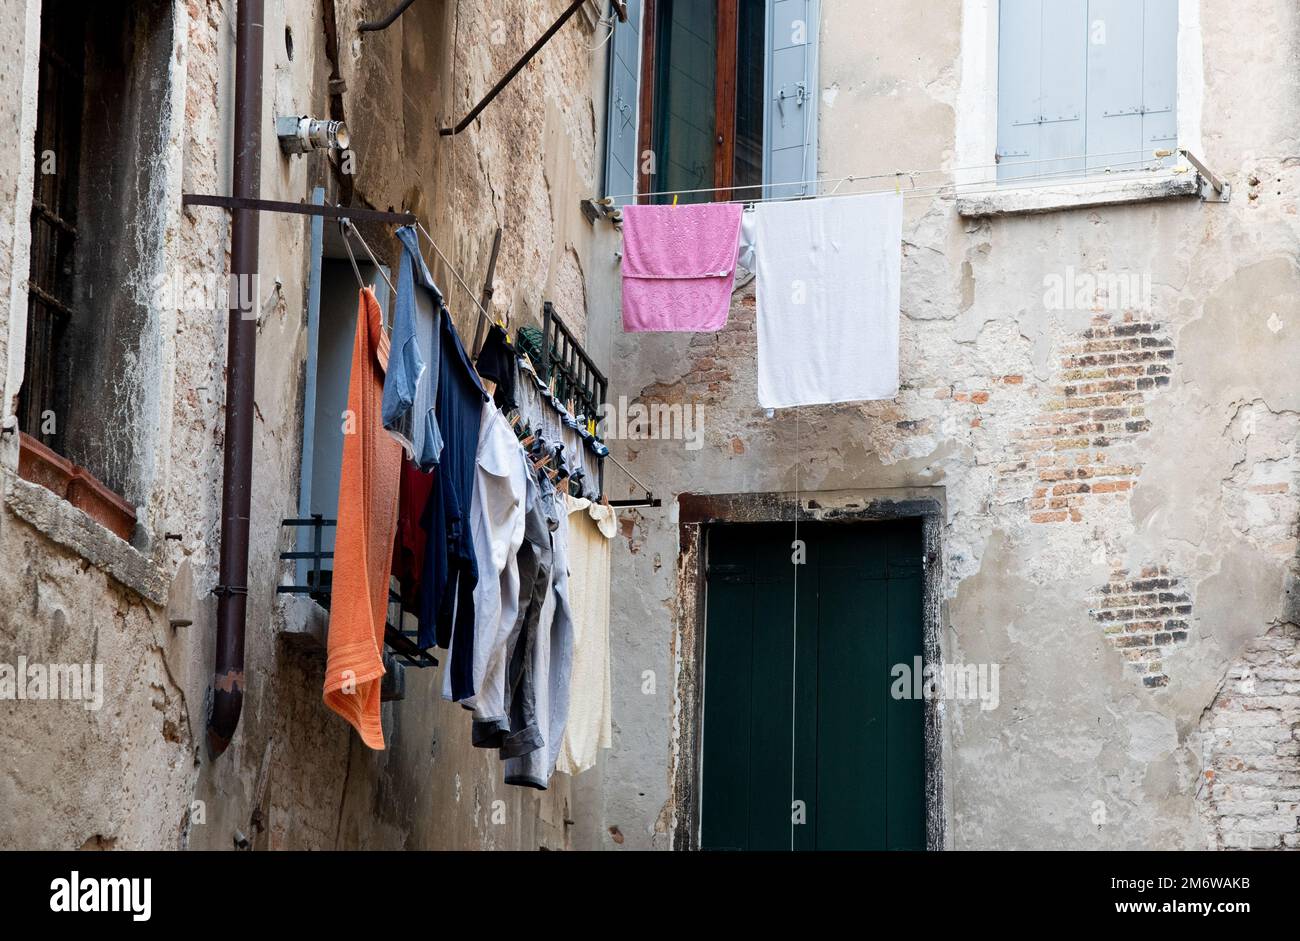 Home laundry hanging on a rope and drying outdoor in the clean air saving the environment. Stock Photo